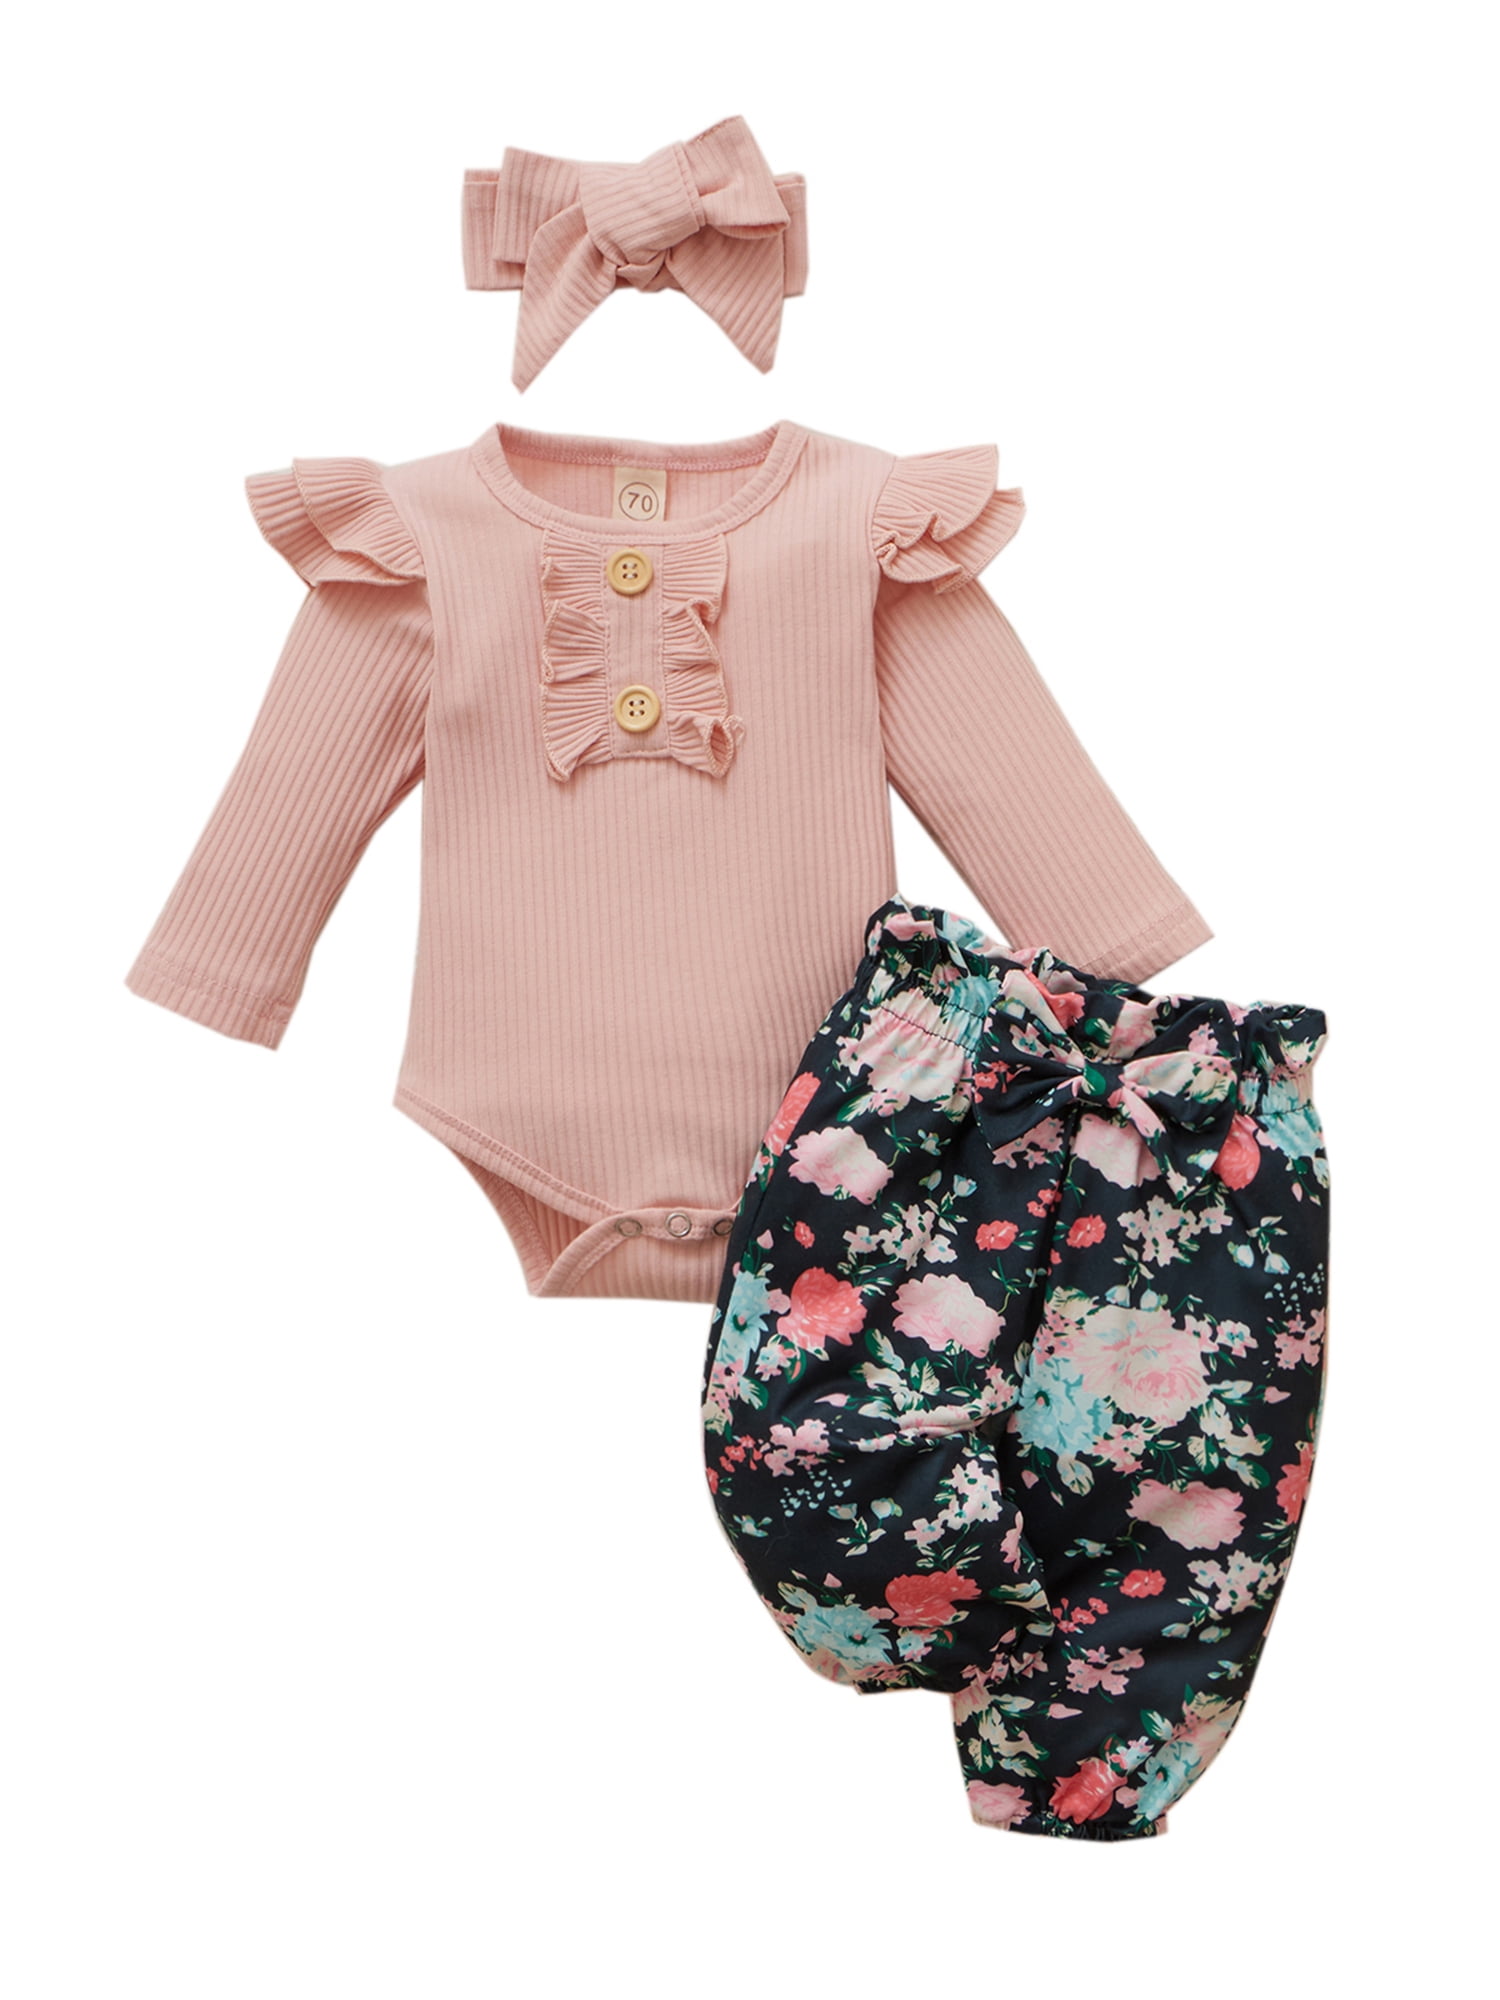 Canrulo Toddler Long Sleeves Romper Floral Pants Headband Outfits Set ...